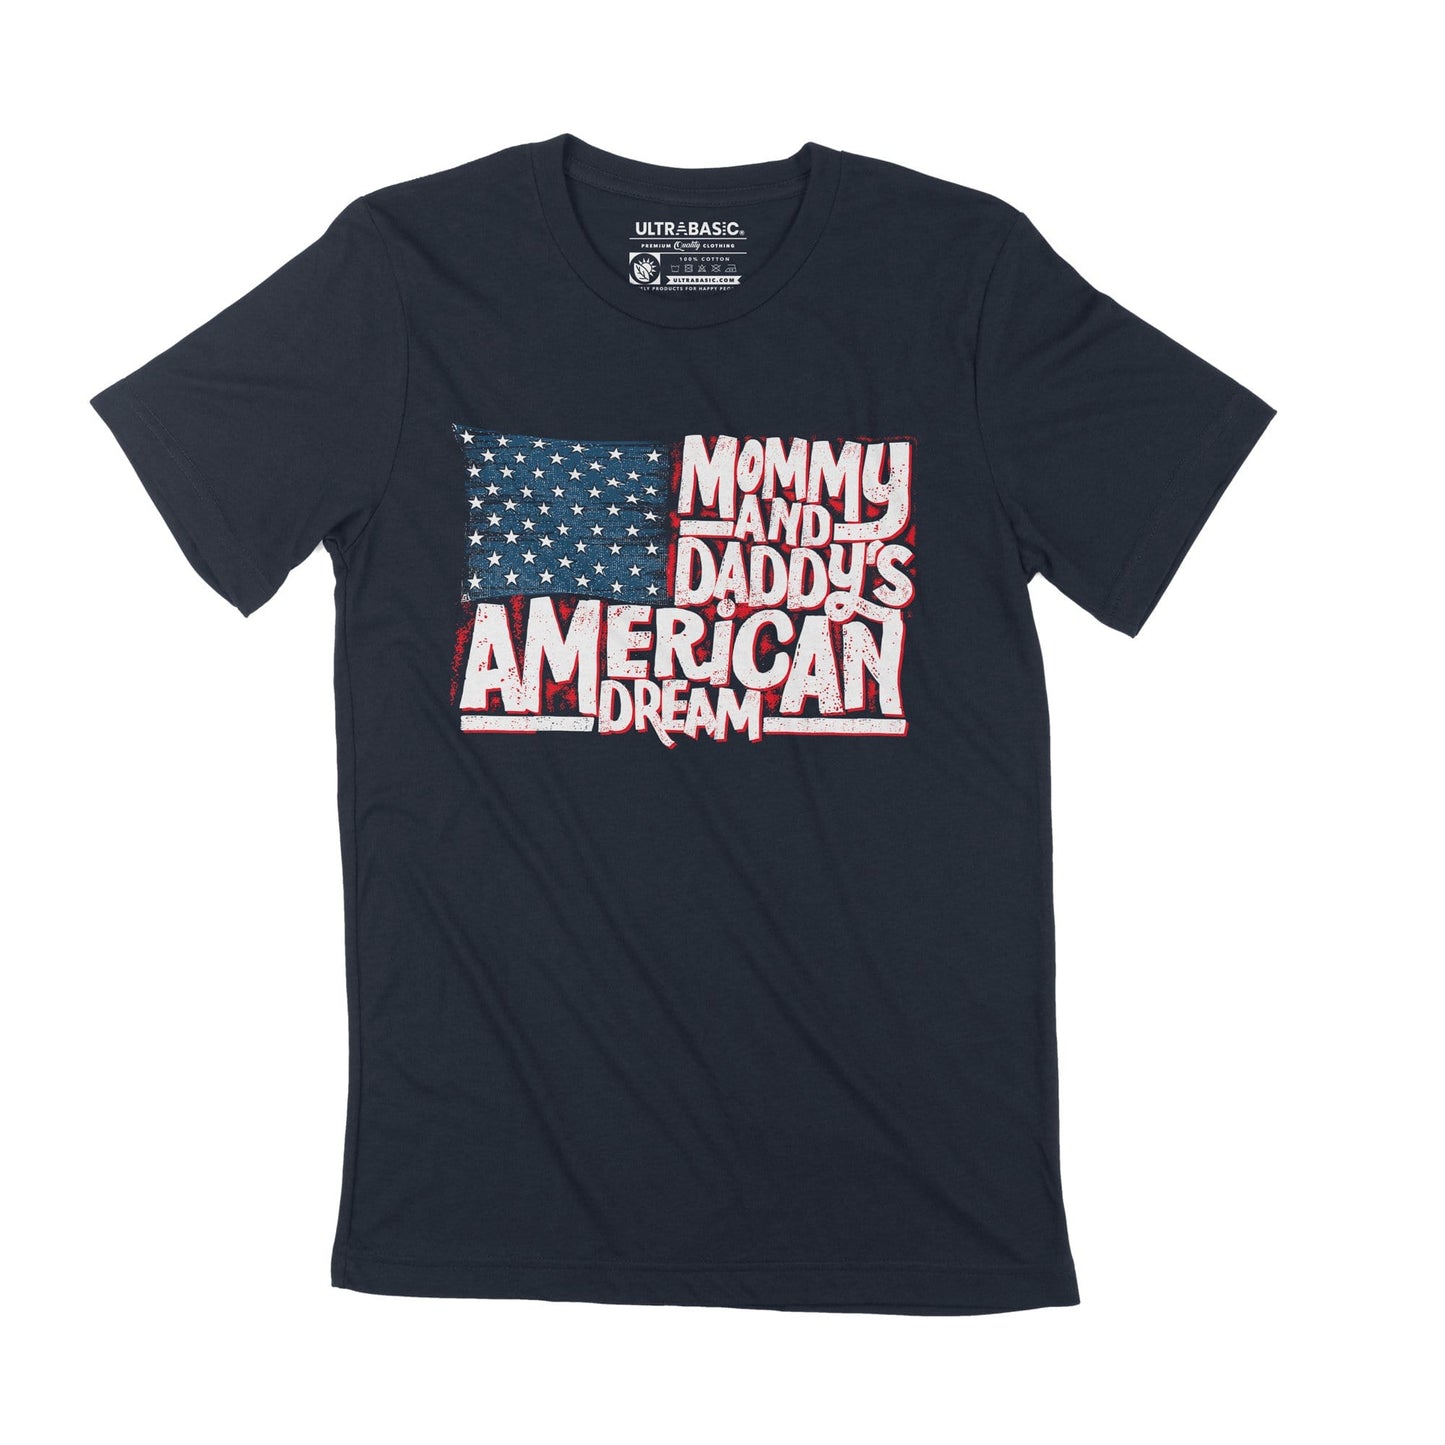 ULTRABASIC Men's T-Shirt Mommy Daddy American Dream American Flag Vintage Casual Gift